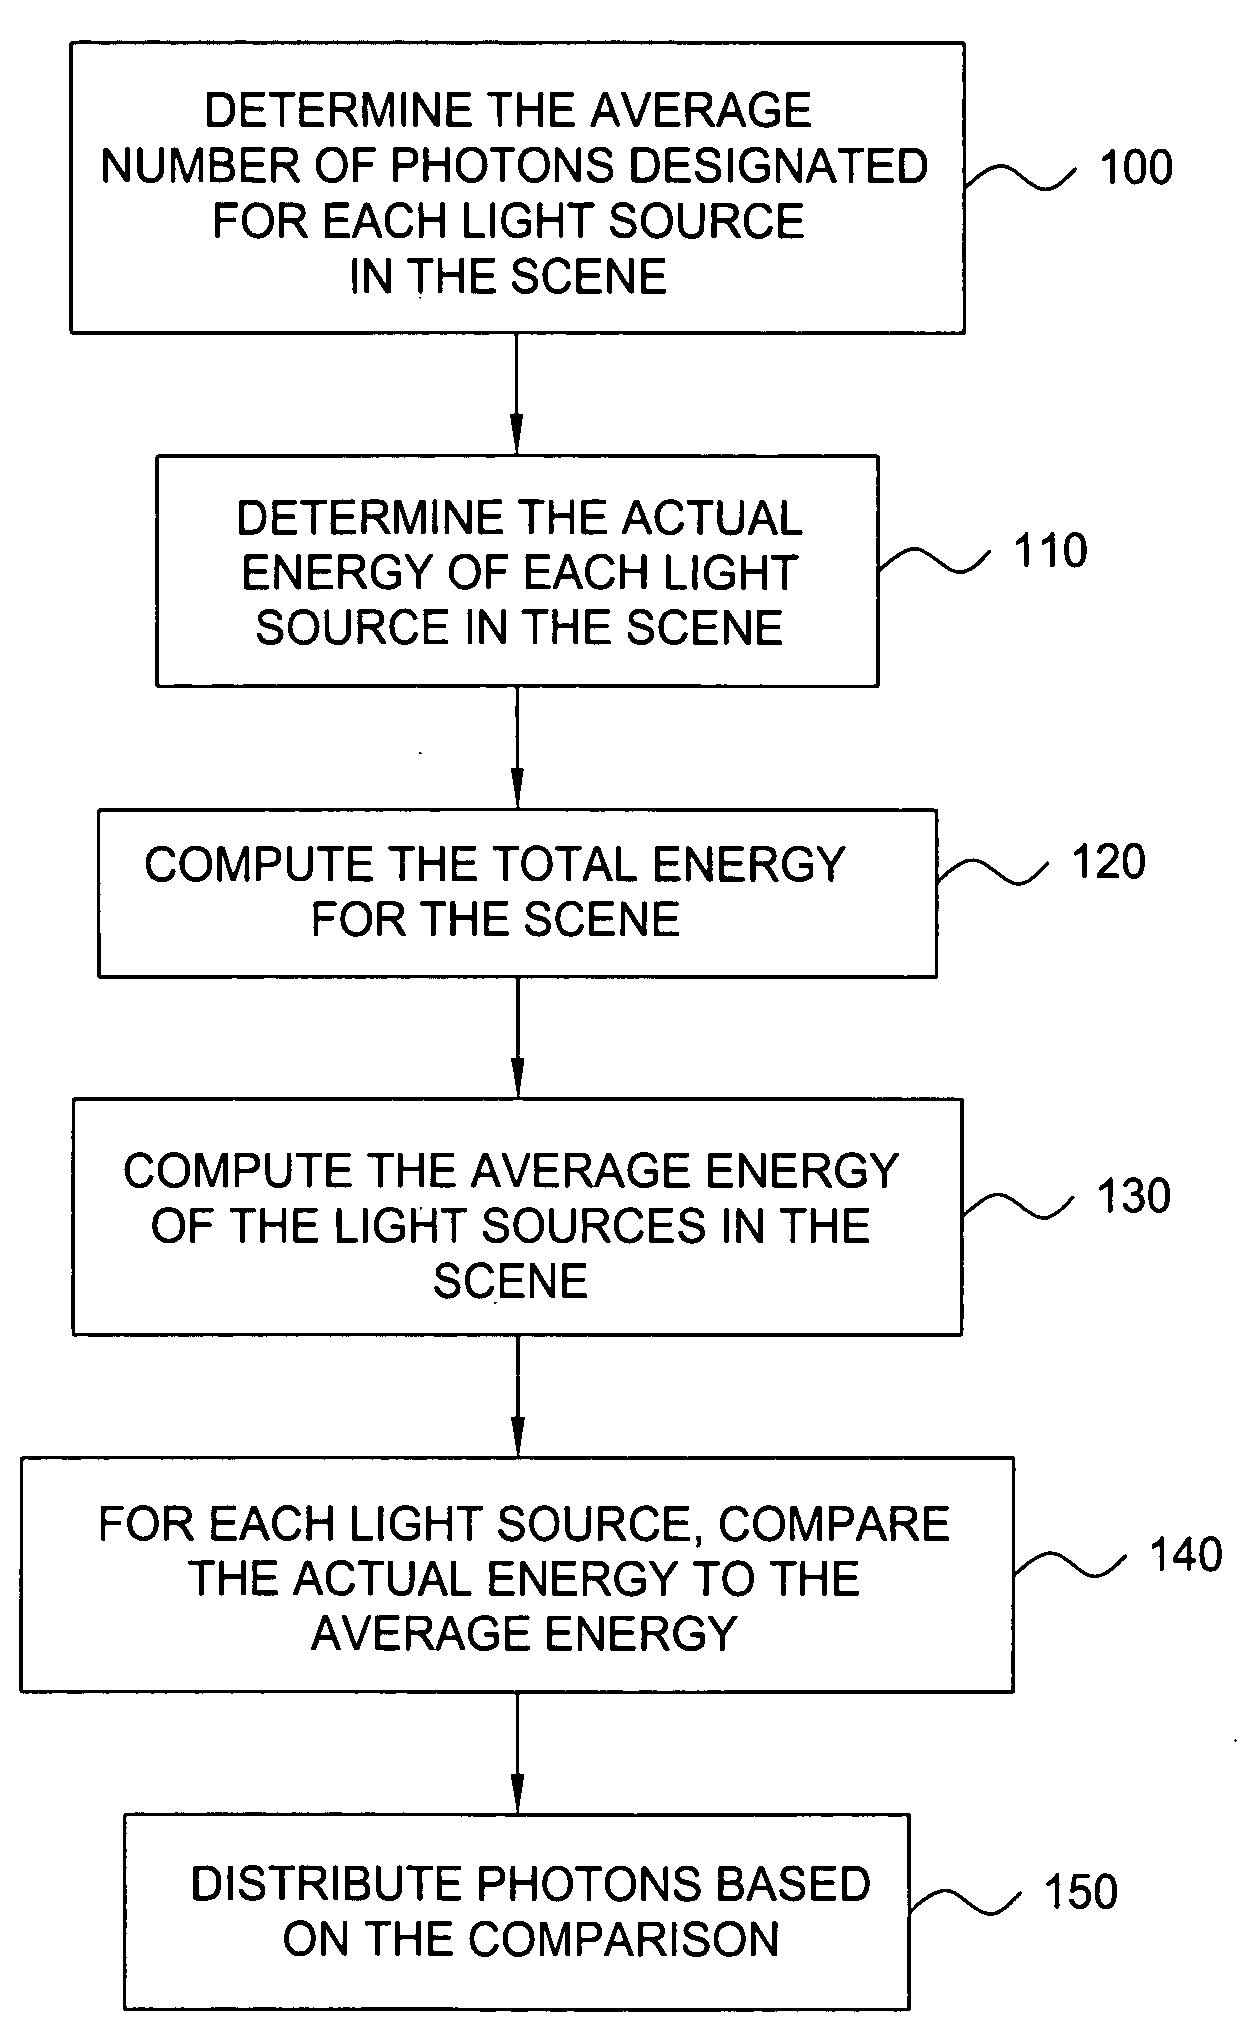 System and method for distributing photons when rendering an image using photon mapping